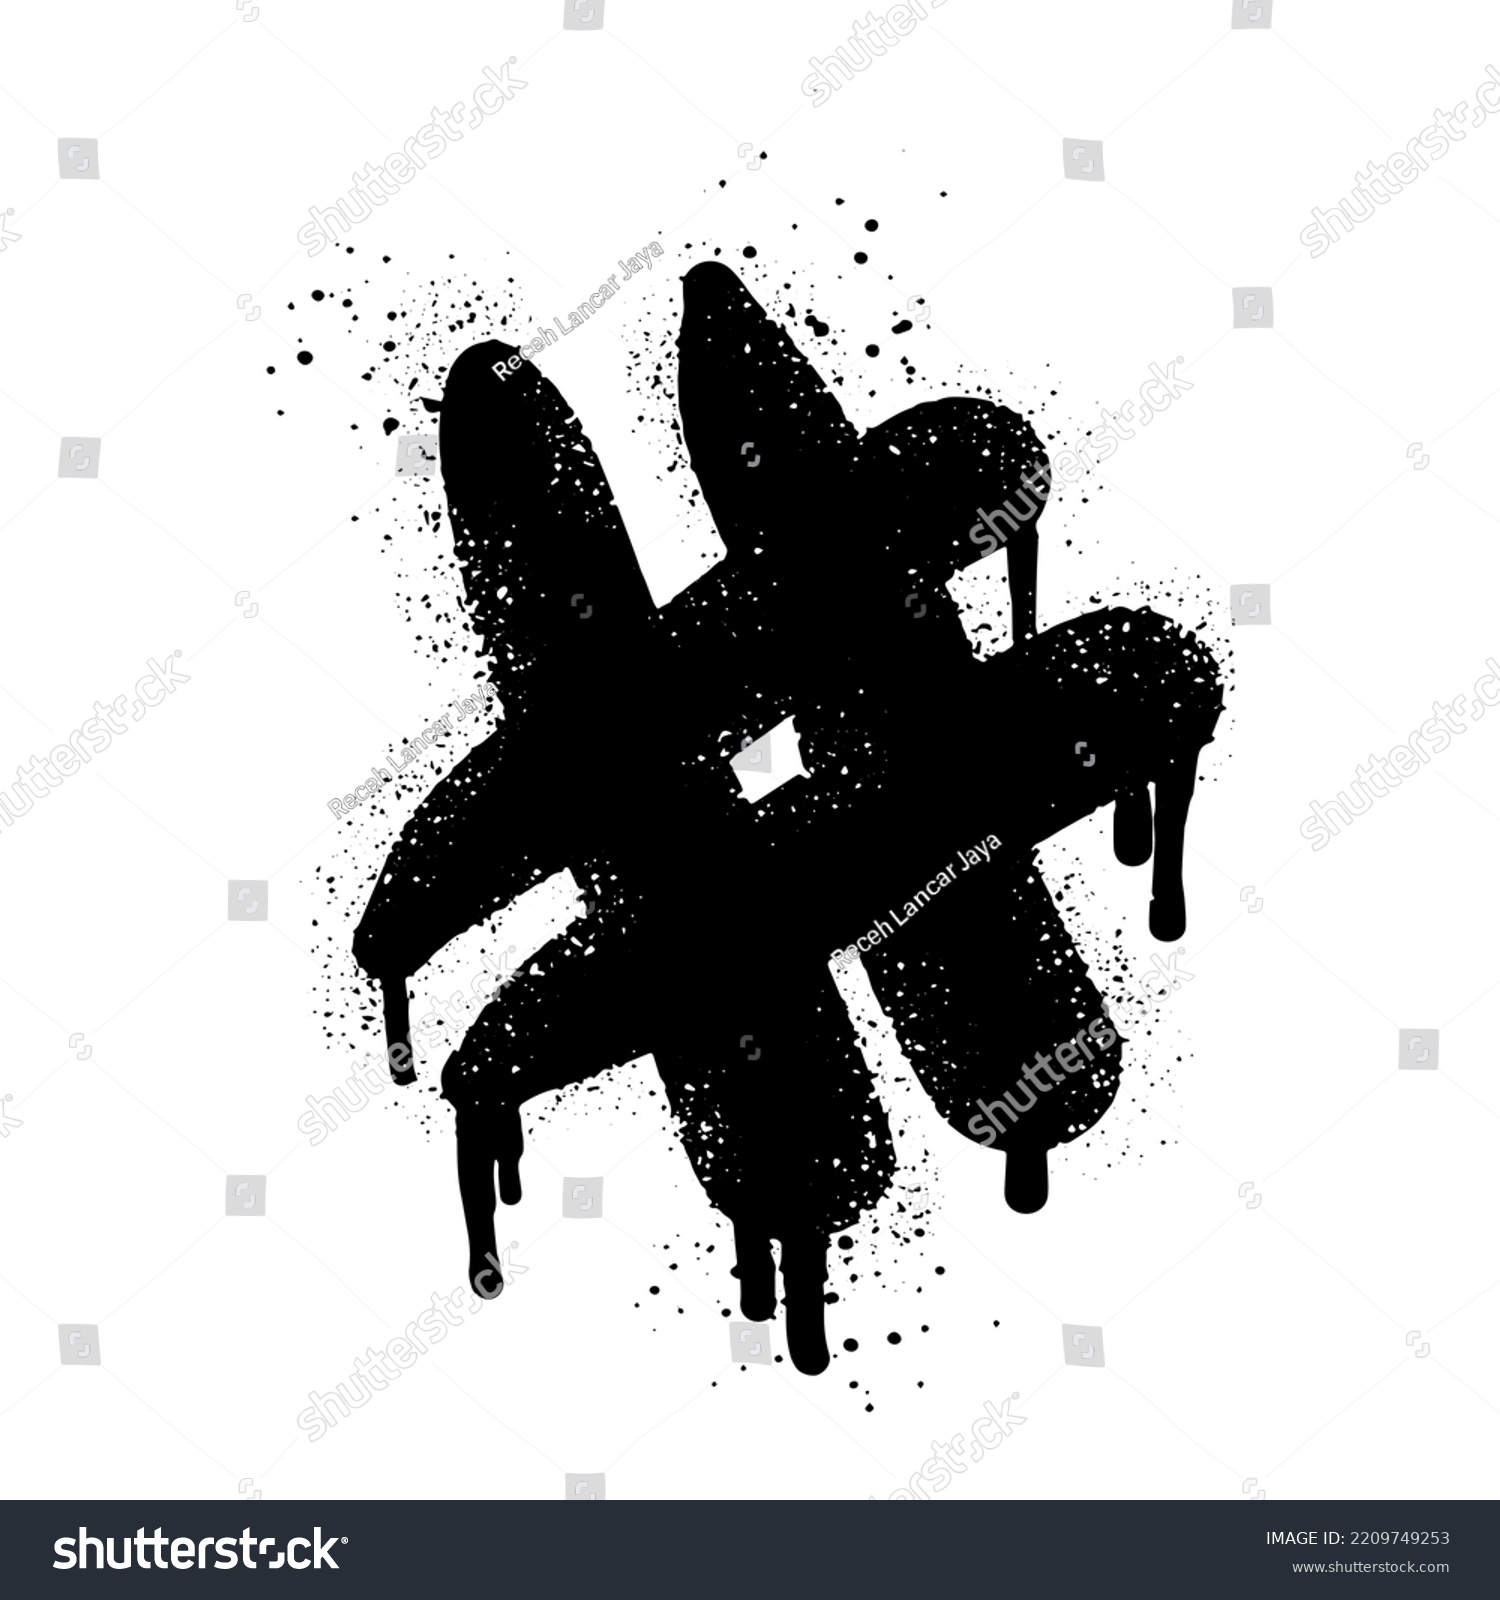 SVG of Doodle element hashtag icon. Spray painted graffiti hash tag symbol in black over white. isolated on white background. vector illustration svg